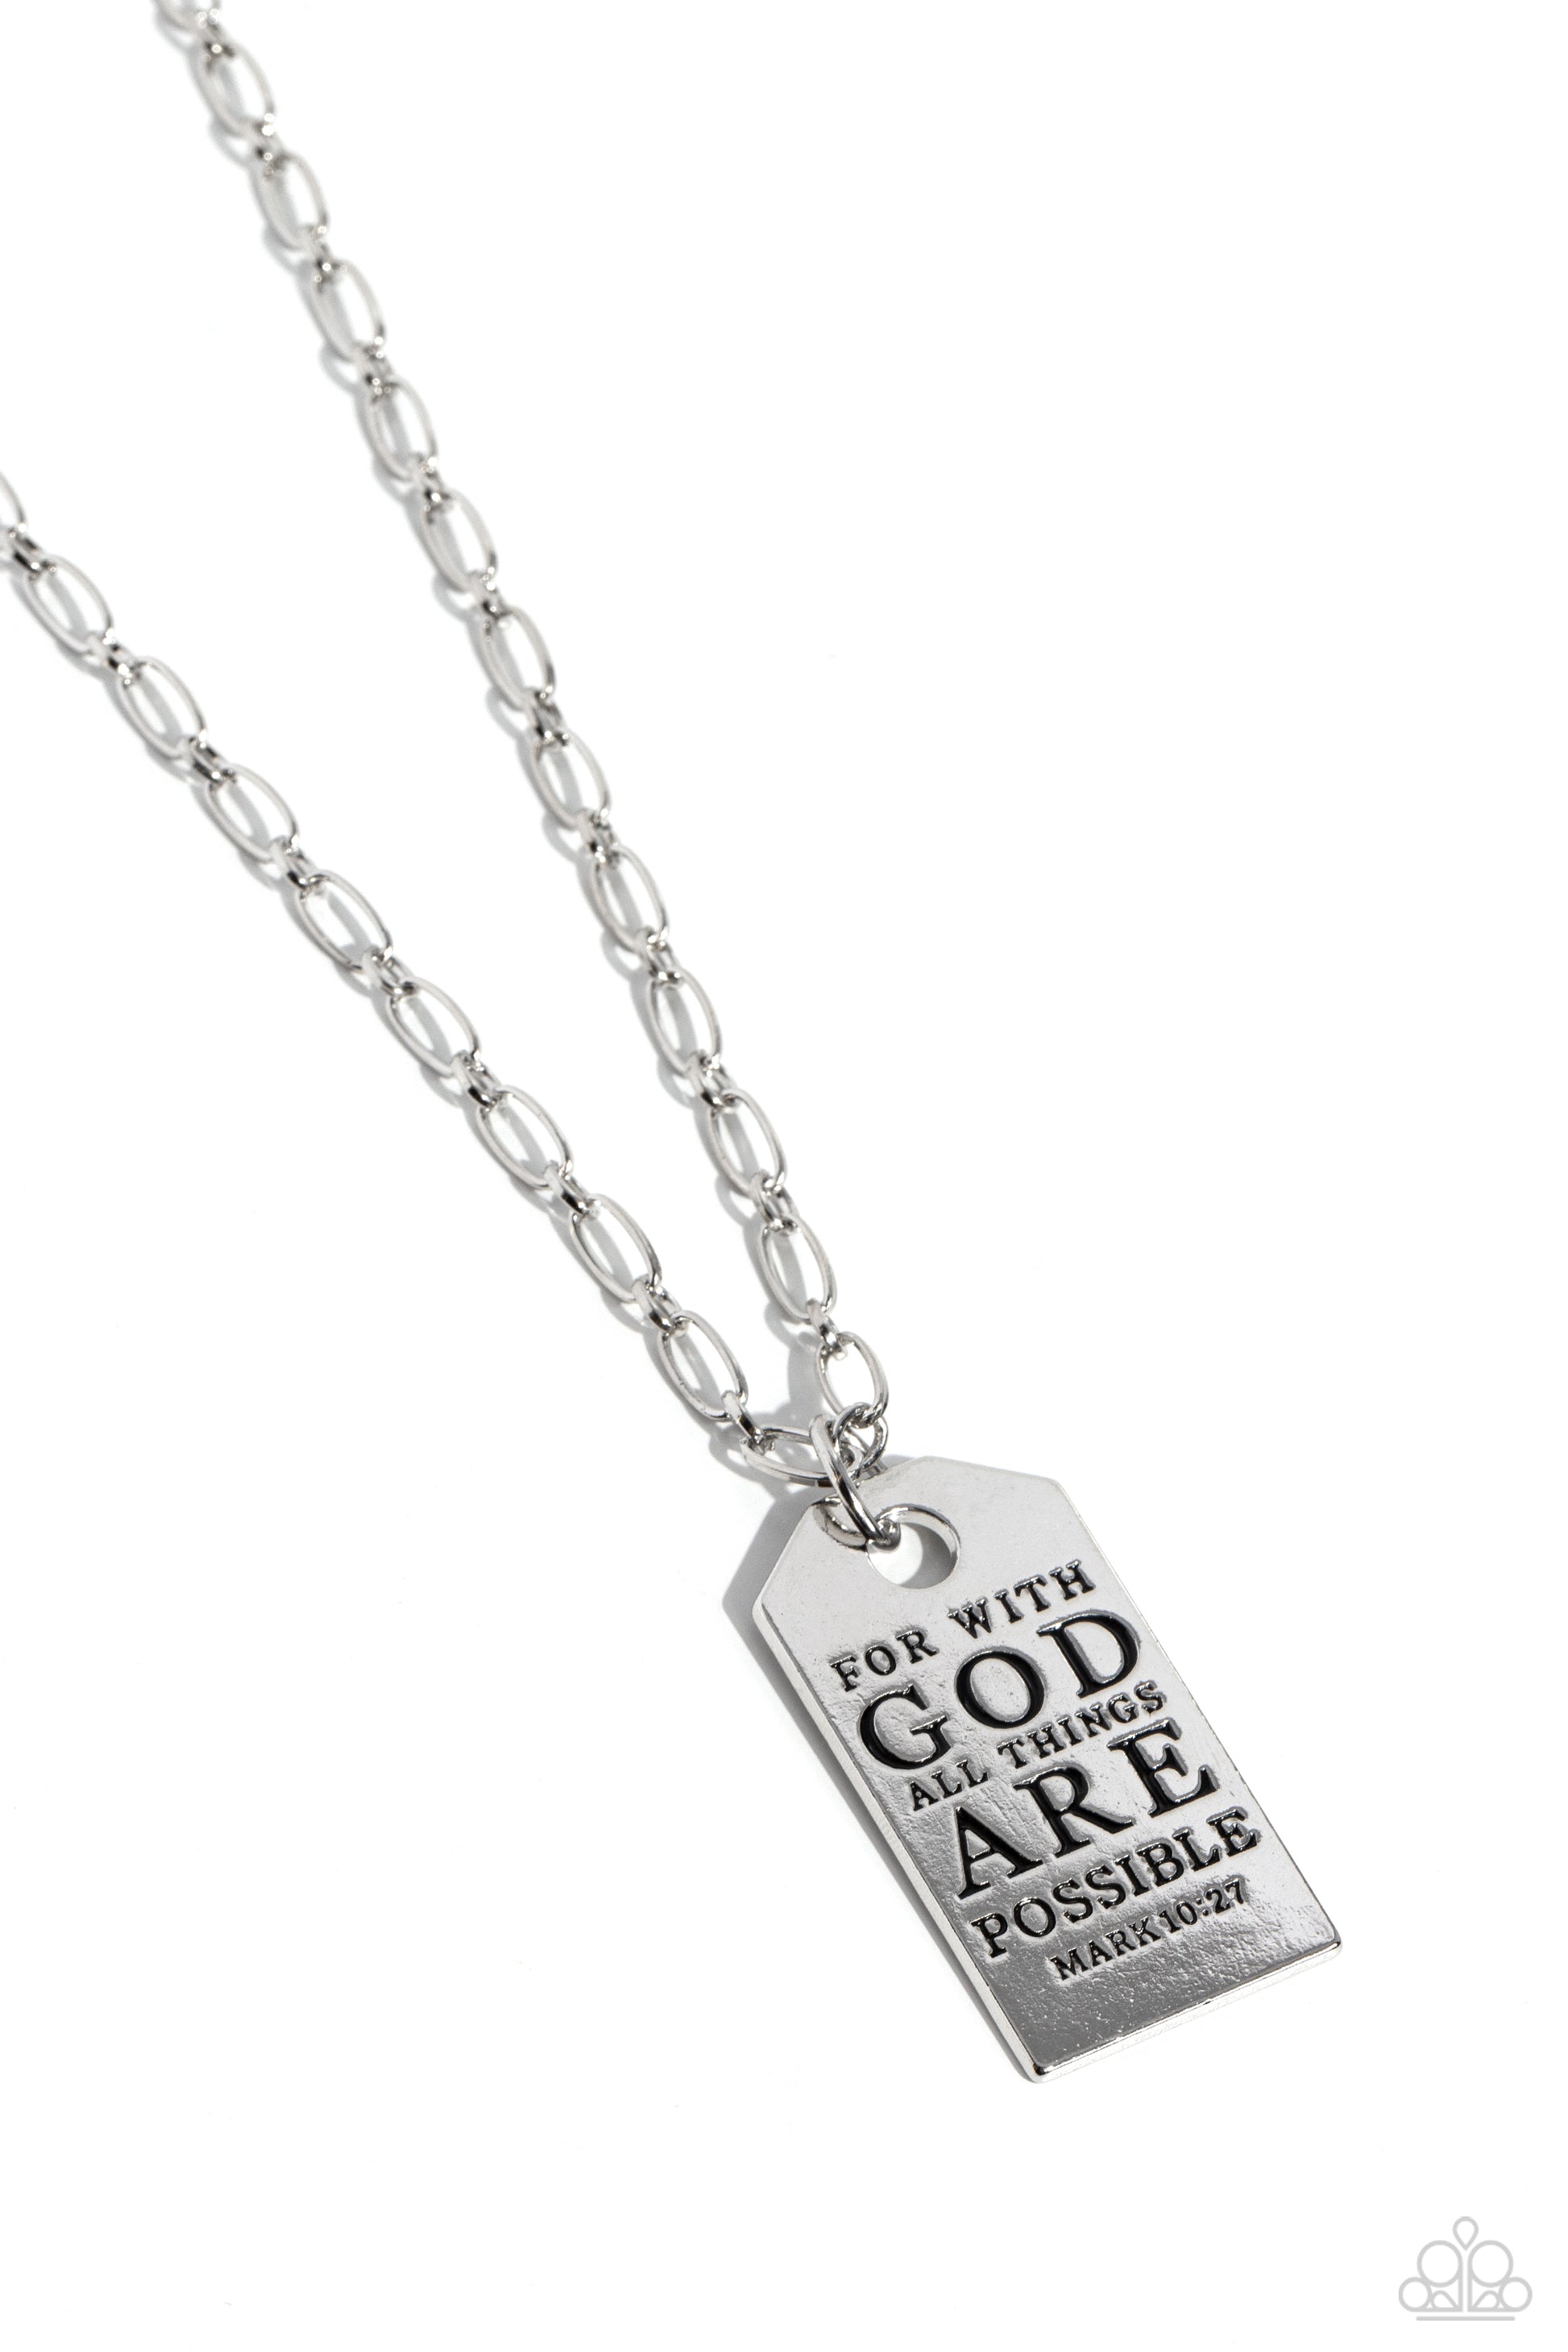 Dangling from simple silver links, a sleek silver hoop boosts a rounded rectangular plate. Stamped on the high-sheen silver pendant, the inspiring phrase "For with GOD all things ARE possible" is listed with the scripture reference "Mark 10:27" just below it in a more dainty font for a hopeful finish. Features an adjustable clasp closure.  Sold as one individual necklace. Includes one pair of matching earrings.